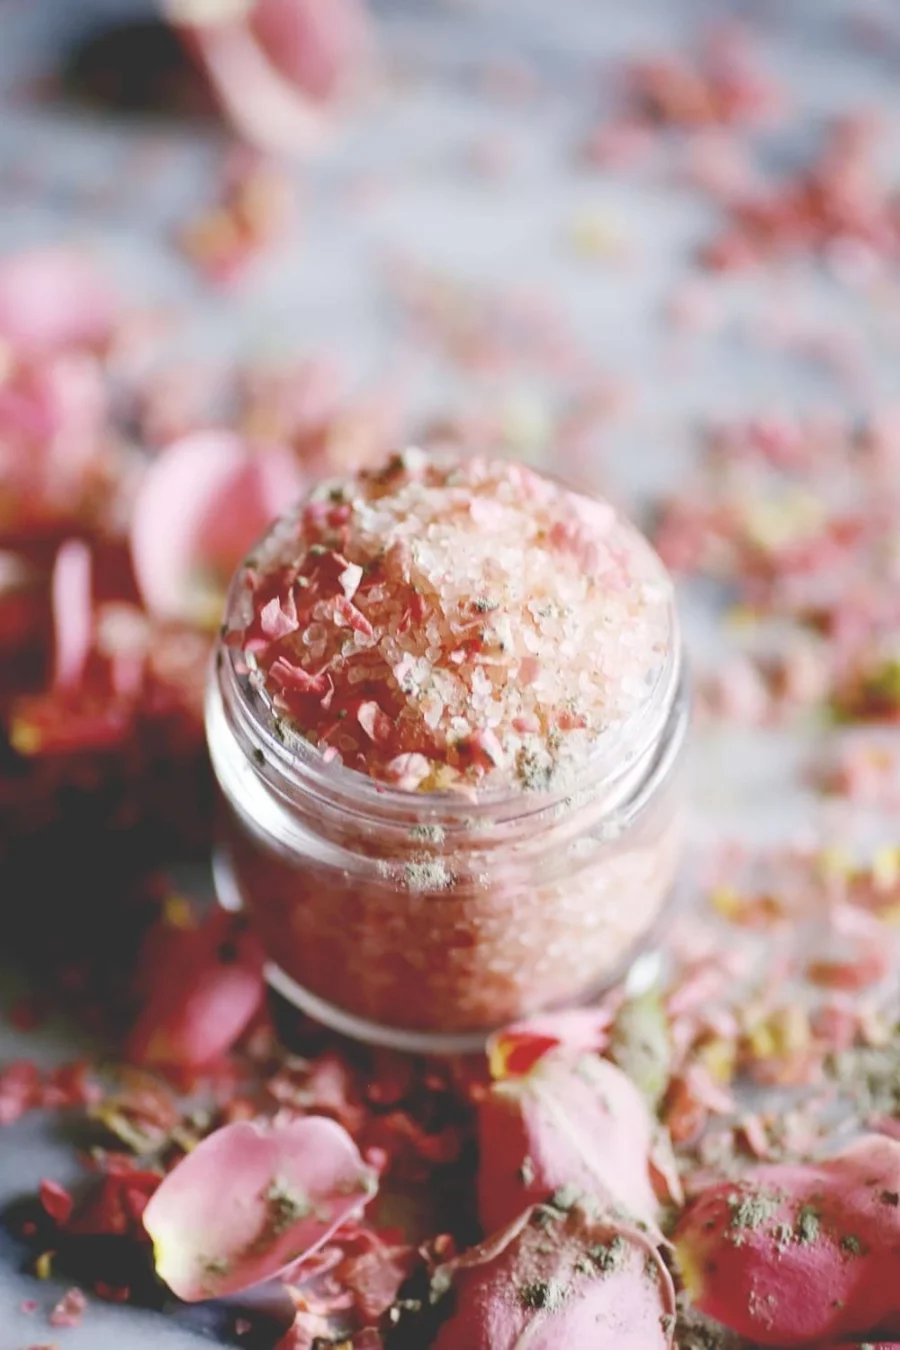 20 DIY Bath Salts Perfect for Gifts and Home - Pretty in Pink Rose and Himalayan Bath Salts